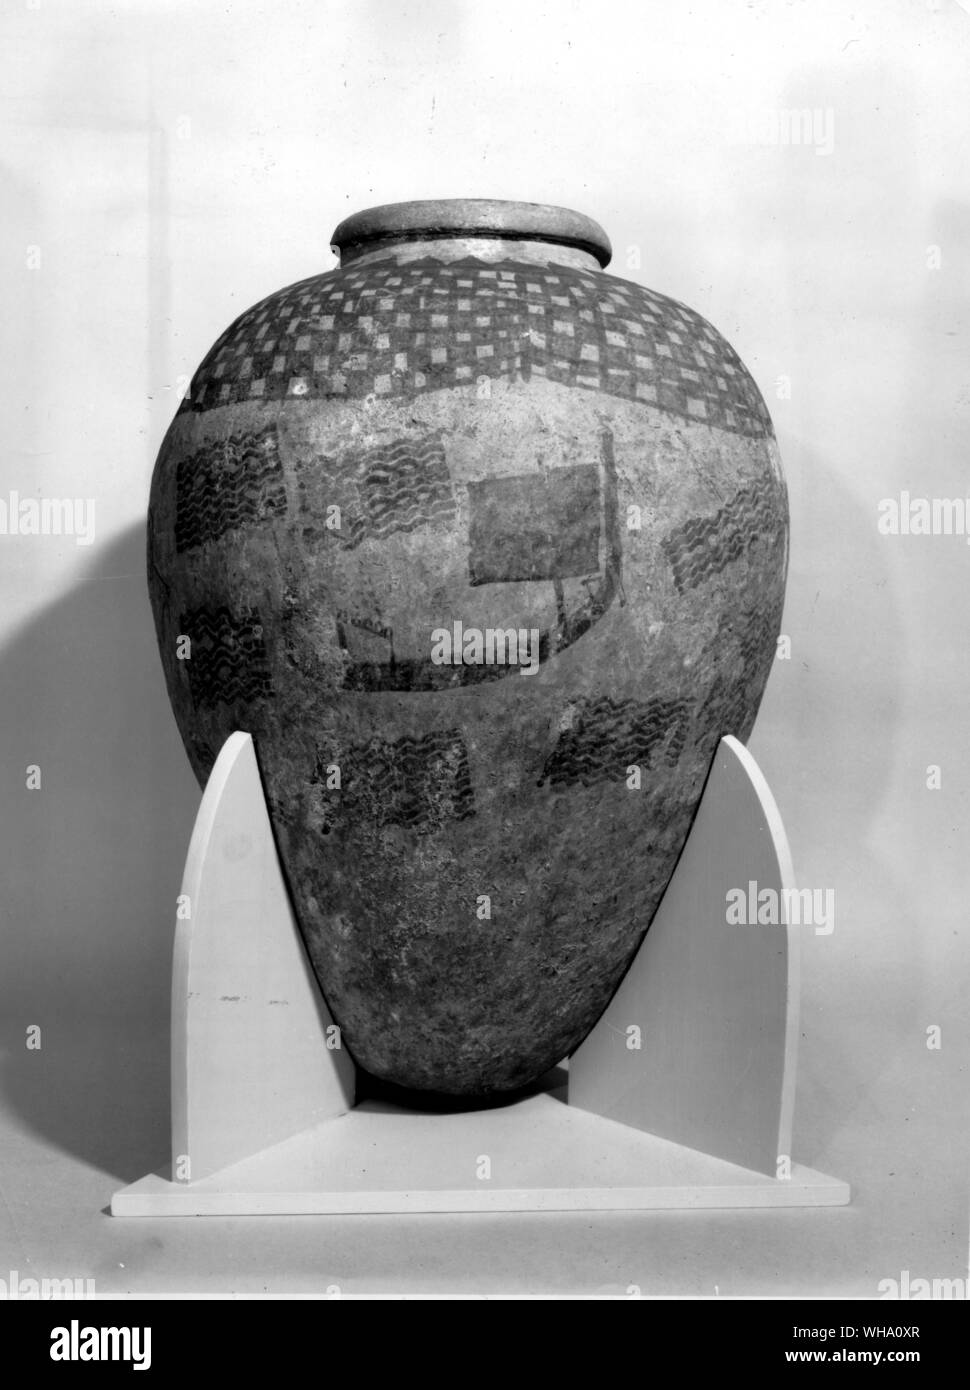 The first known representation of a square sail - At the end of the Naquada period there is one last superb pot (now in the British Museum); it carries a plain, careful picture of a ship with a square sail. One theory is that the pot depicts a foreigner - the square sail is sometimes used in heiroglyphics to denote a stranger - and that it records the advent of a visiting ship from the Persian Gulf, the end perhaps of the first foreign-going voyage. It may be so. Naquada was a small town on the bend of the Nile where the ancient track came over the mountains from Quseir by way of the Wadi Stock Photo